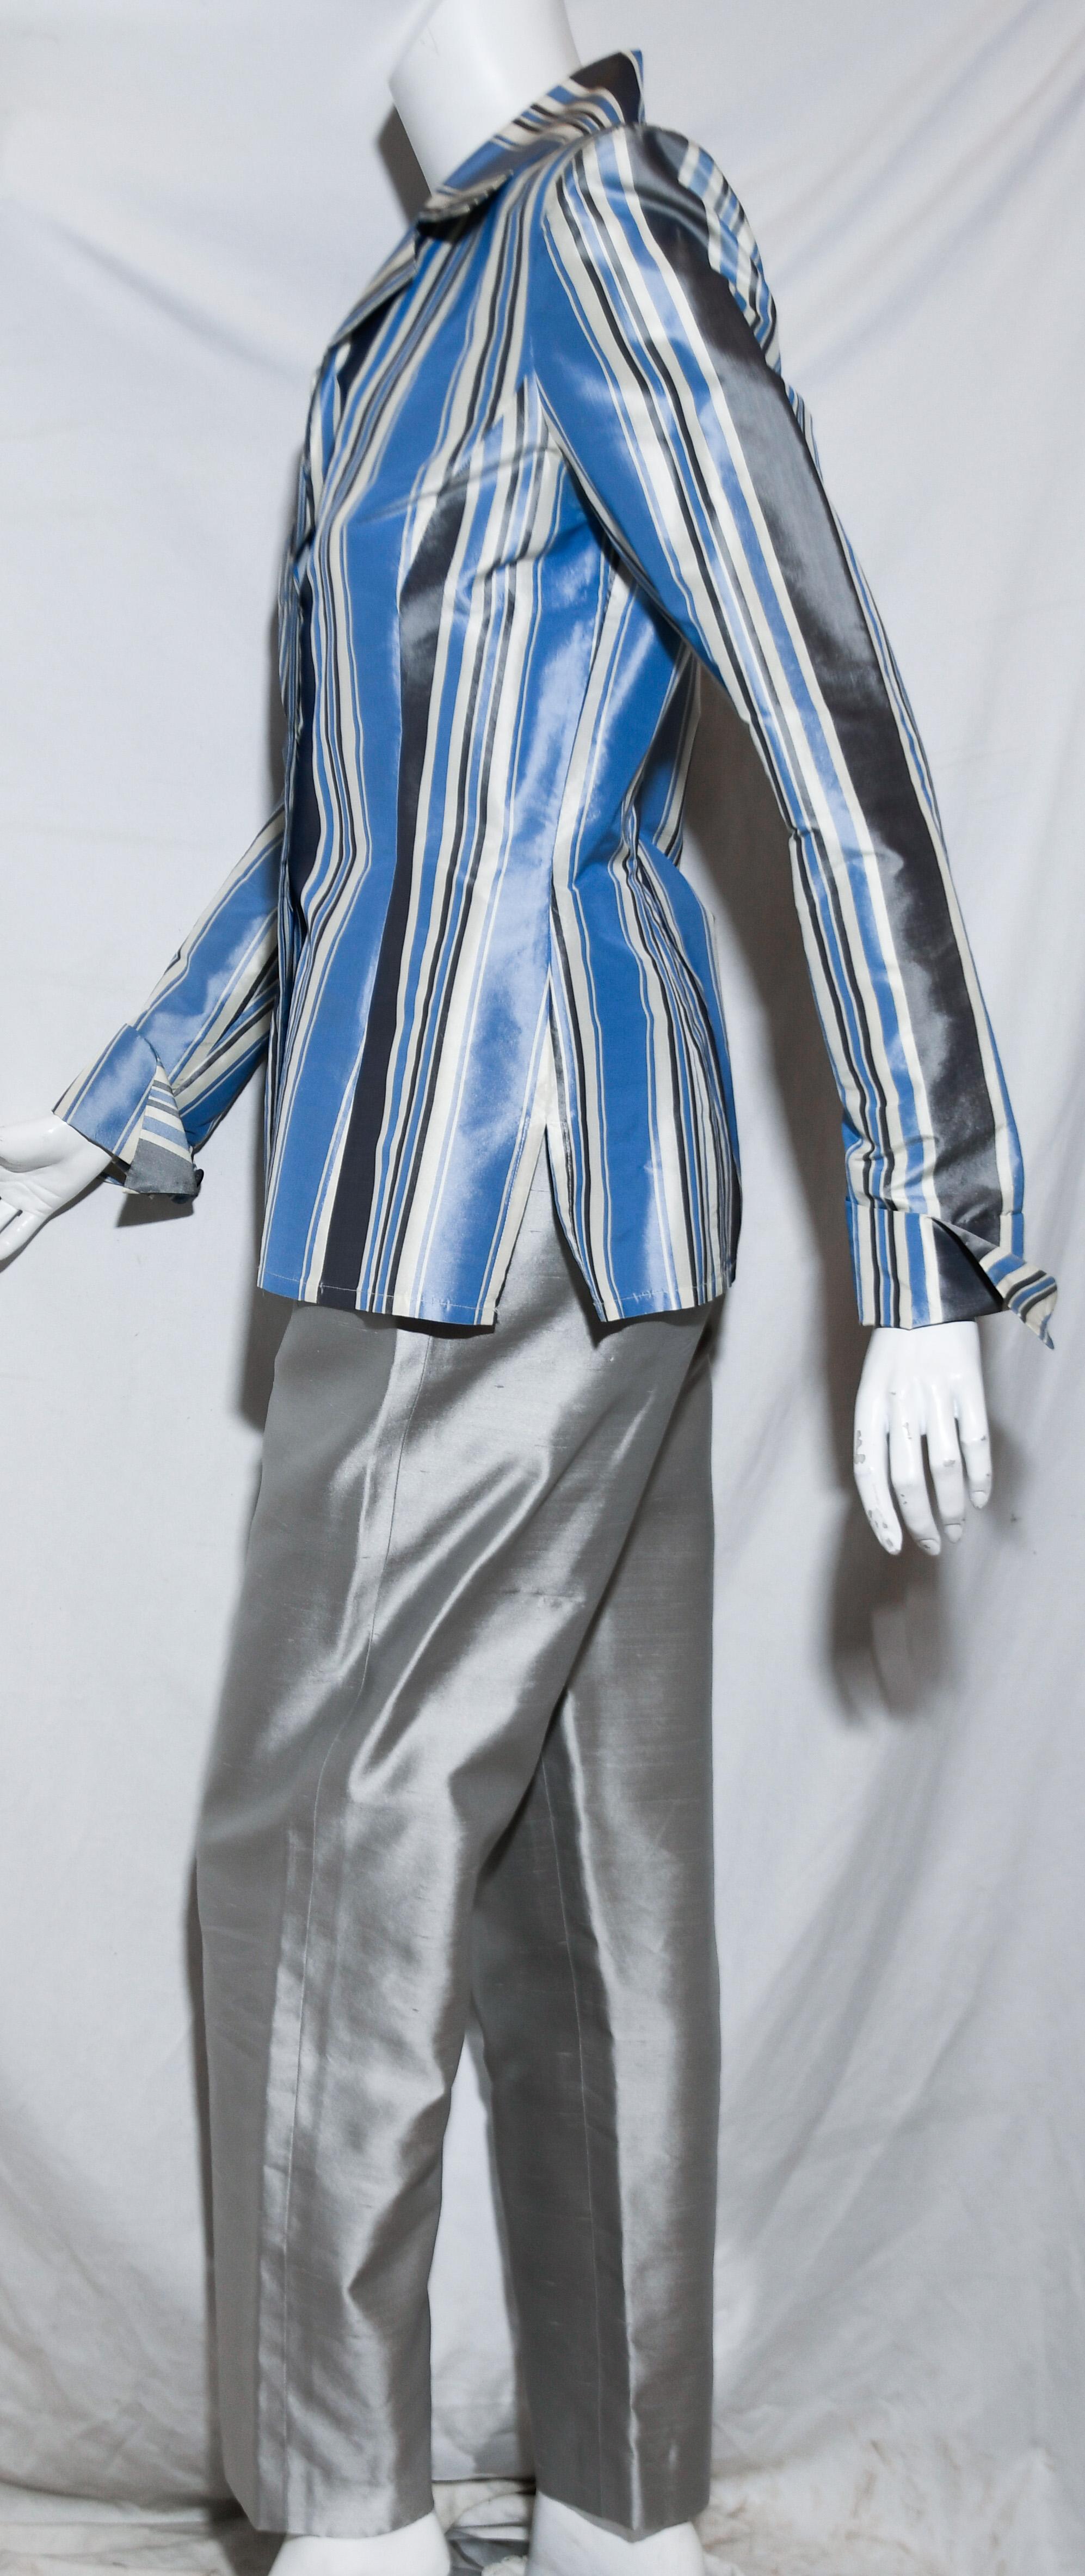 Oscar de la Renta raw silk 2 piece pant suit includes a multi color striped jacket in tones of blue, ivory and grey.  The slacks are solid grey.  This shirt style jacket has turn up cuffs, shirt collar and 3 buttons for closure.   The jacket is not